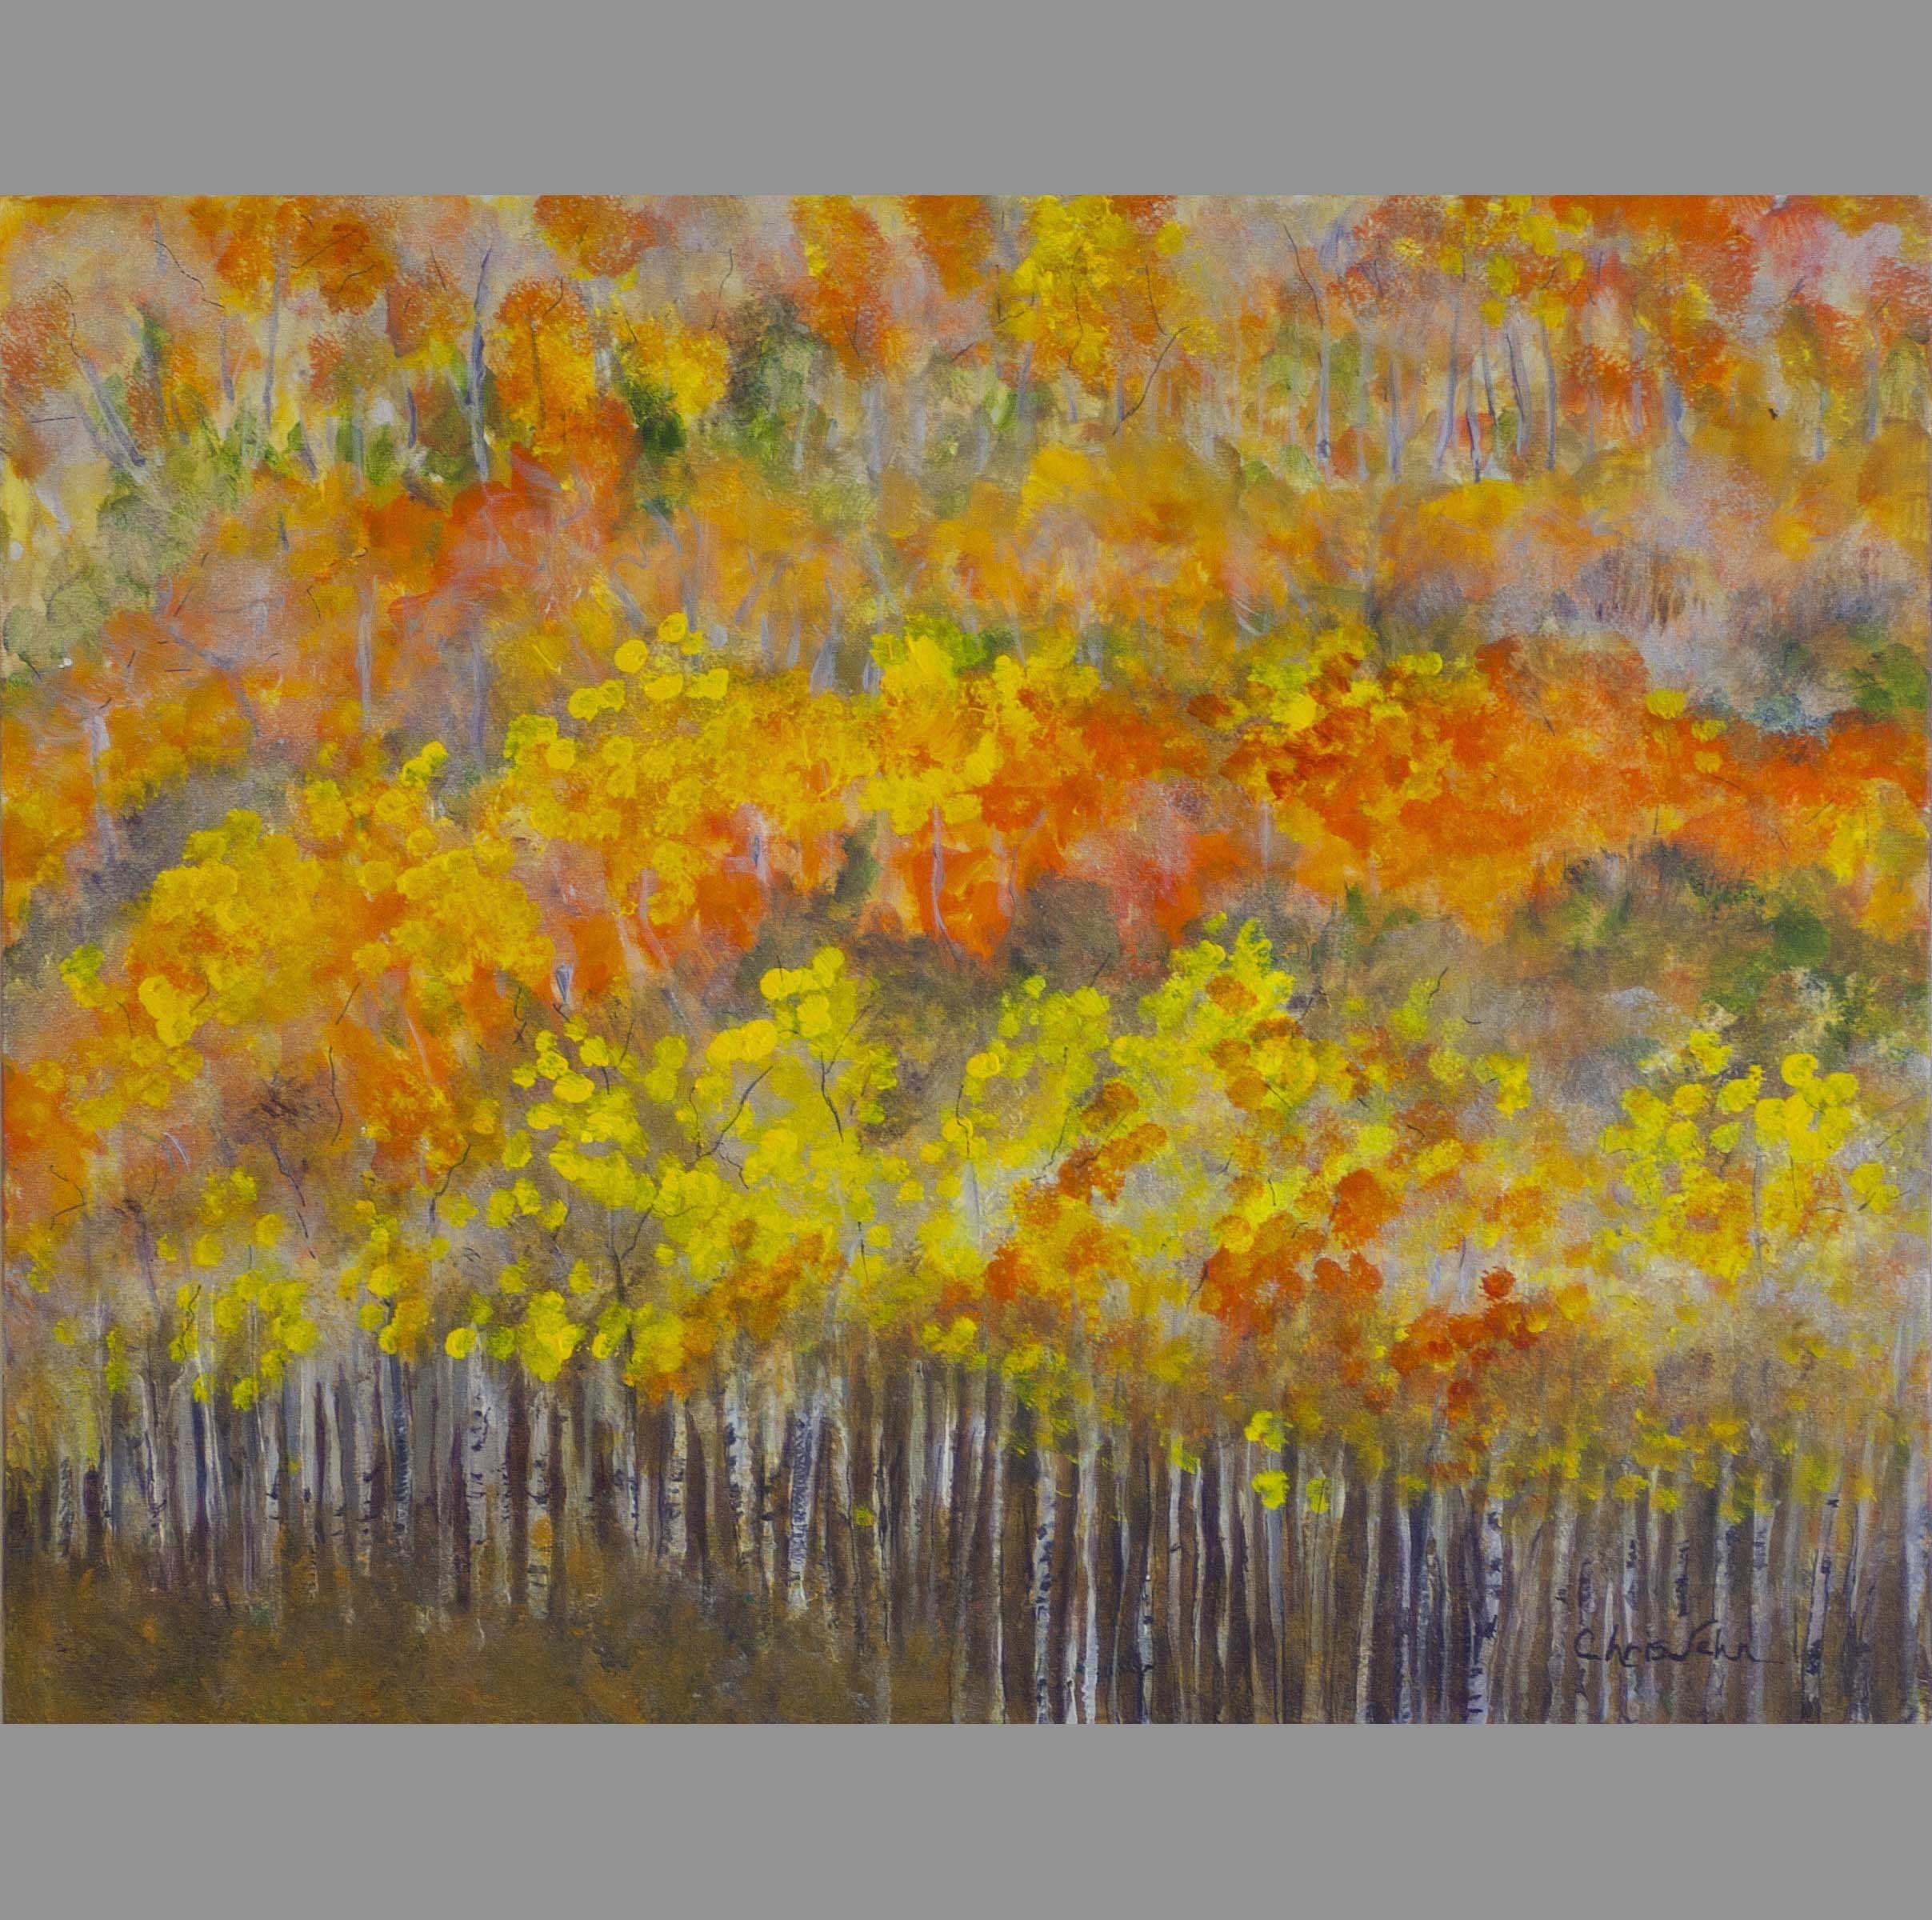 Chris Jehn; Aspen Mountain Side, 2016, Original Painting Acrylic, 20 x 16 inches. Artwork description: 241 In Colorado you often see panoramas of mountain sides with aspen trees. The colors and the layers are inspiring, and a challenge to paint. This is one of my favorite paintings. Original artwork by Chris Jehn...